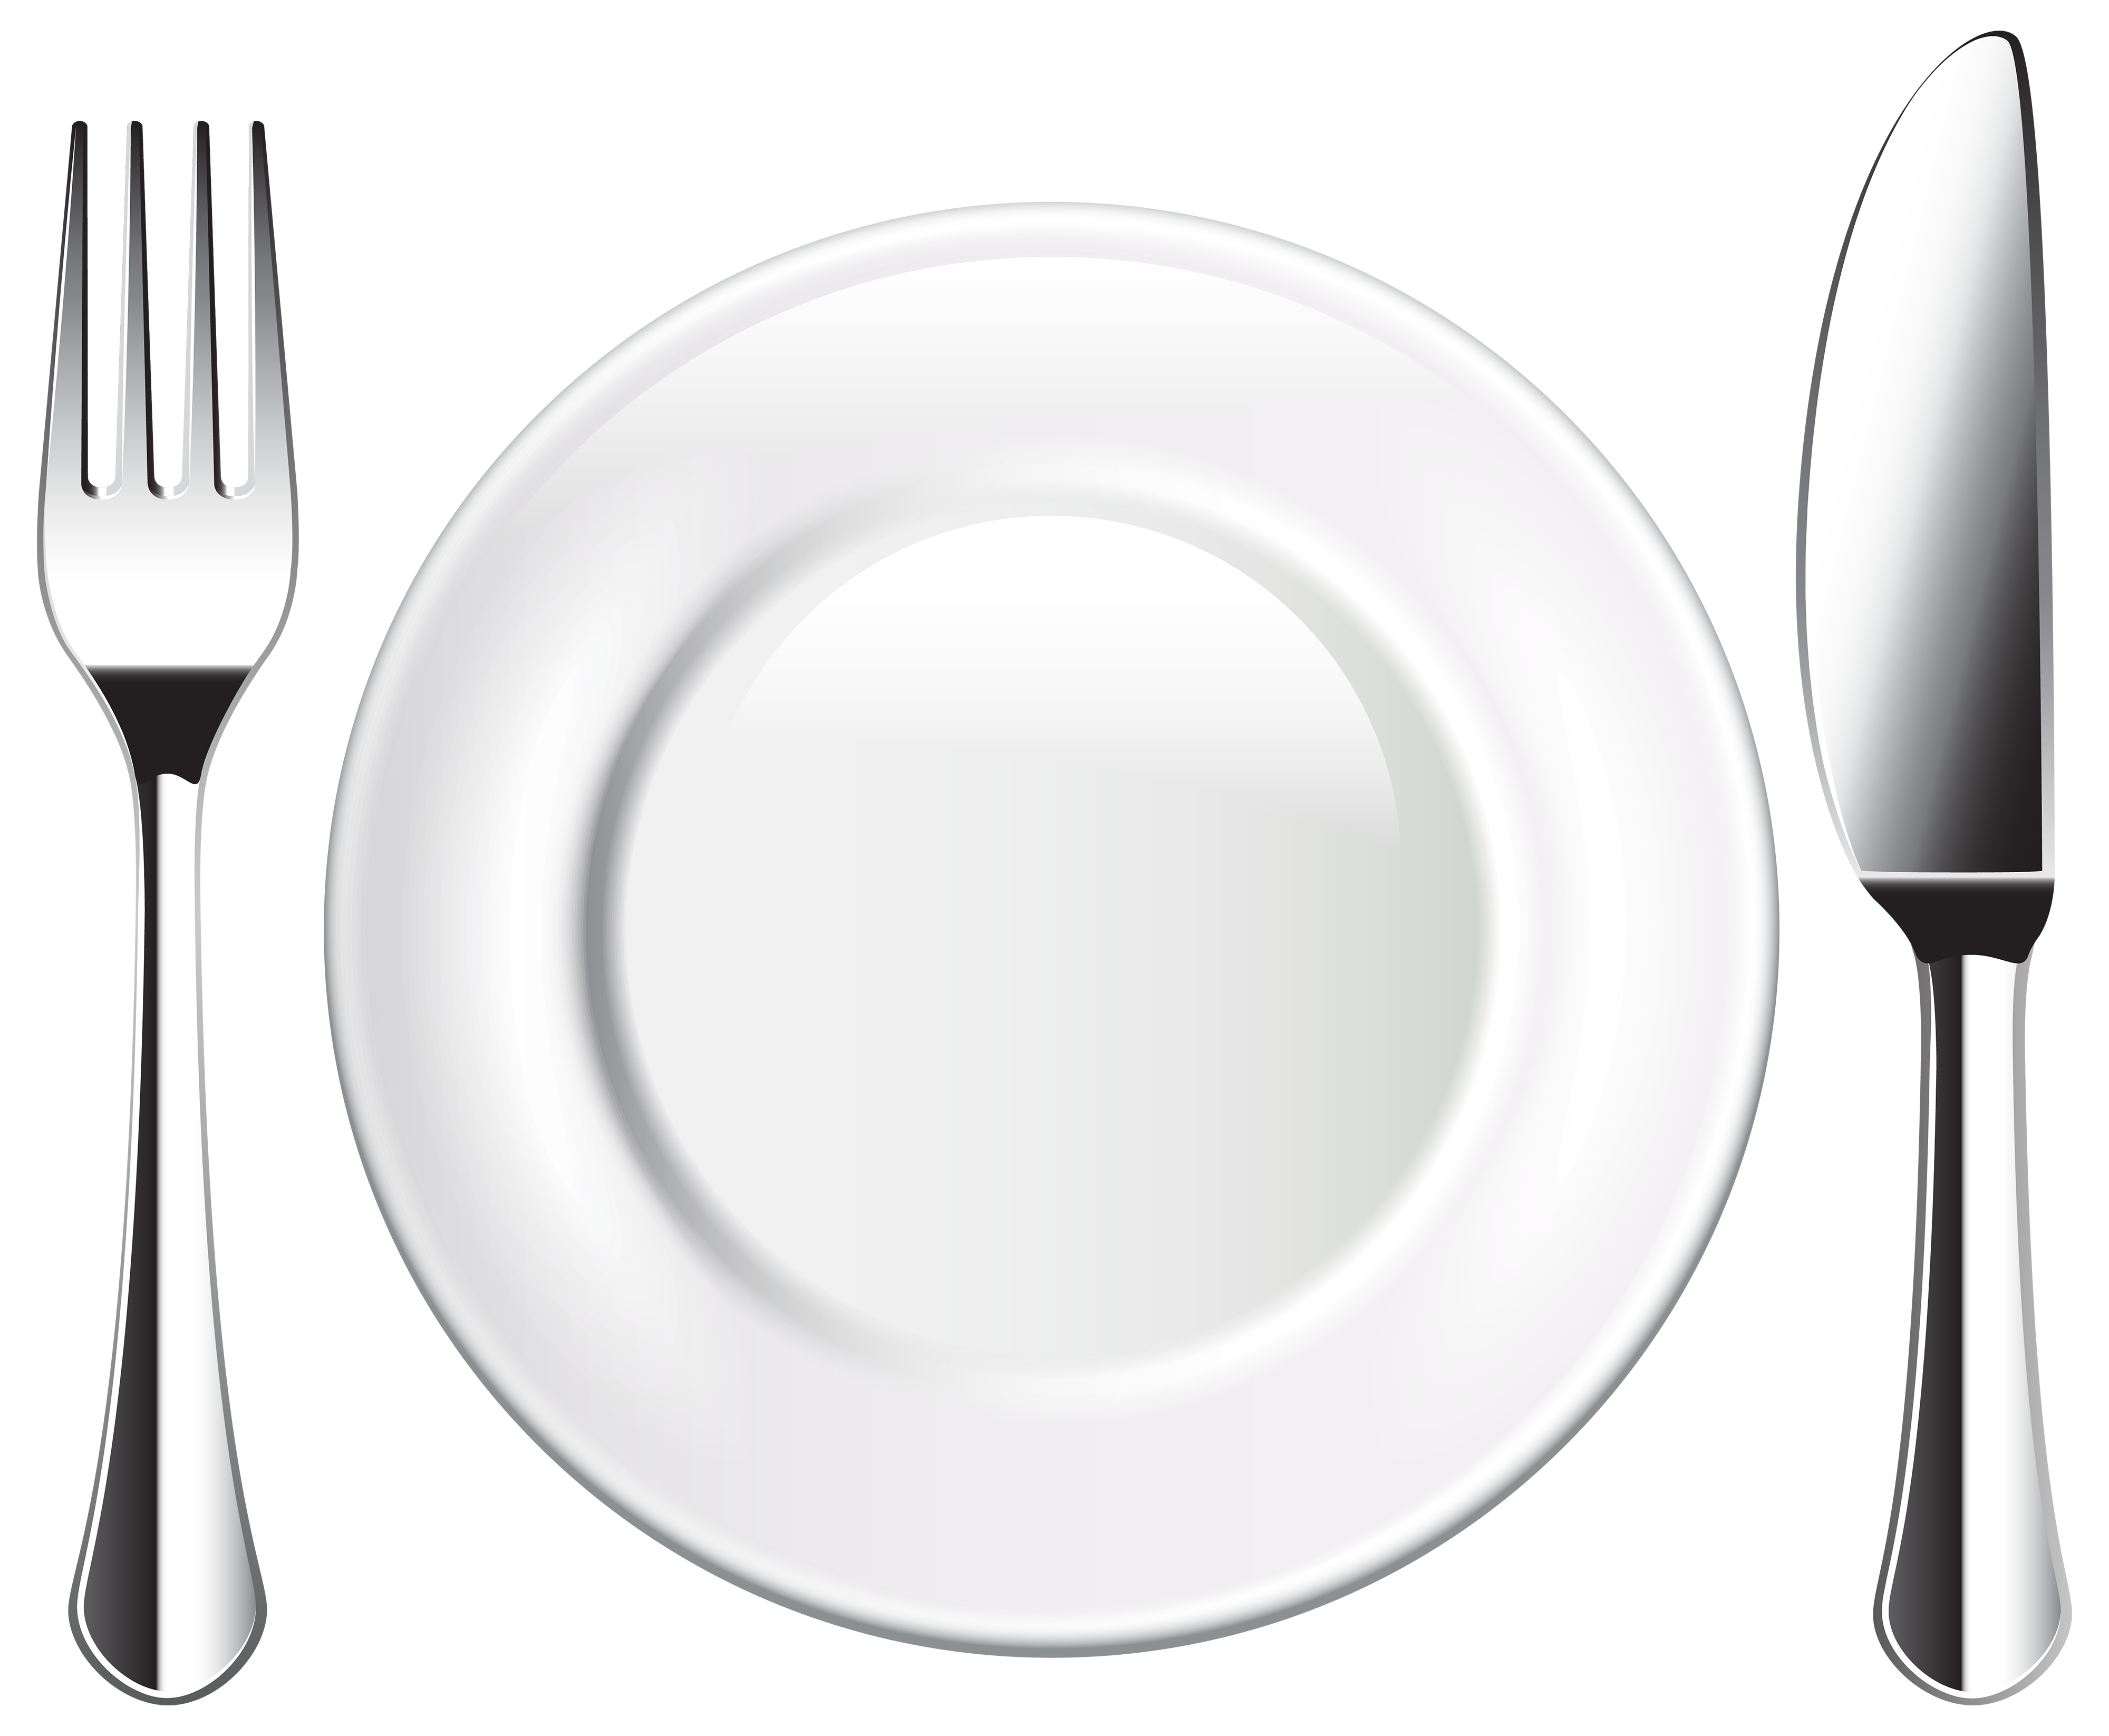 Plate Knife and Fork PNG Clipart - Best WEB Clipart